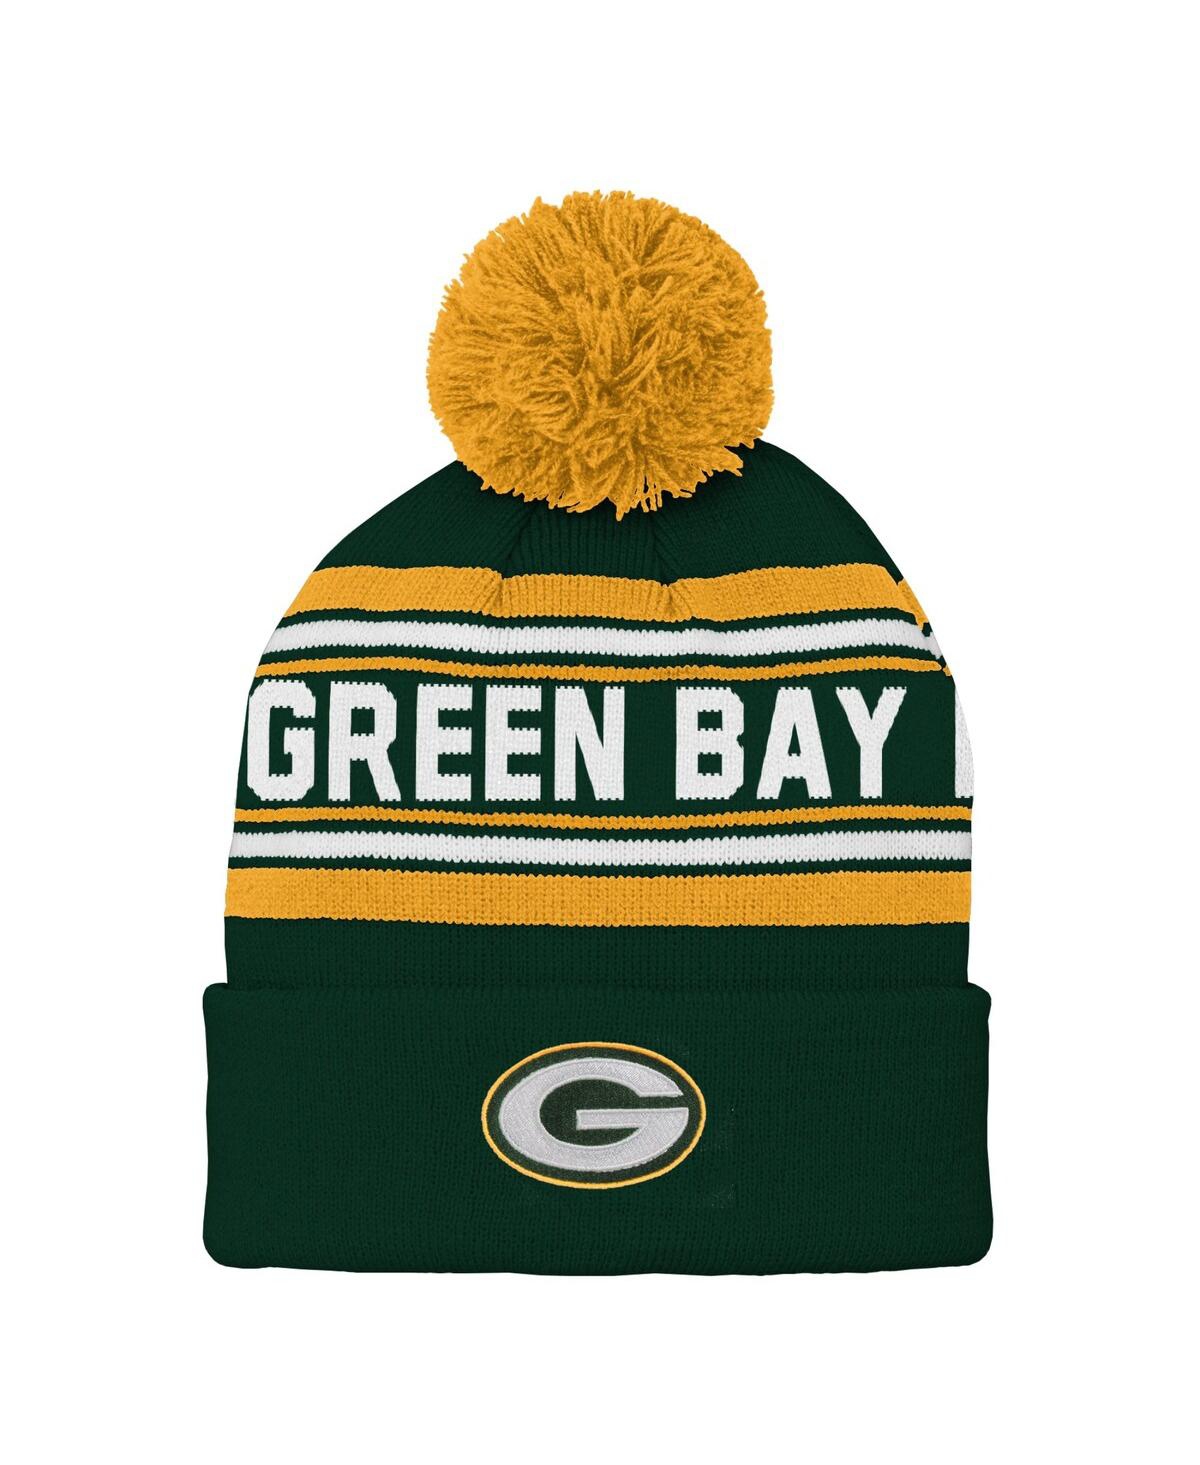 Outerstuff Kids' Youth Boys And Girls Green Green Bay Packers Jacquard Cuffed Knit Hat With Pom